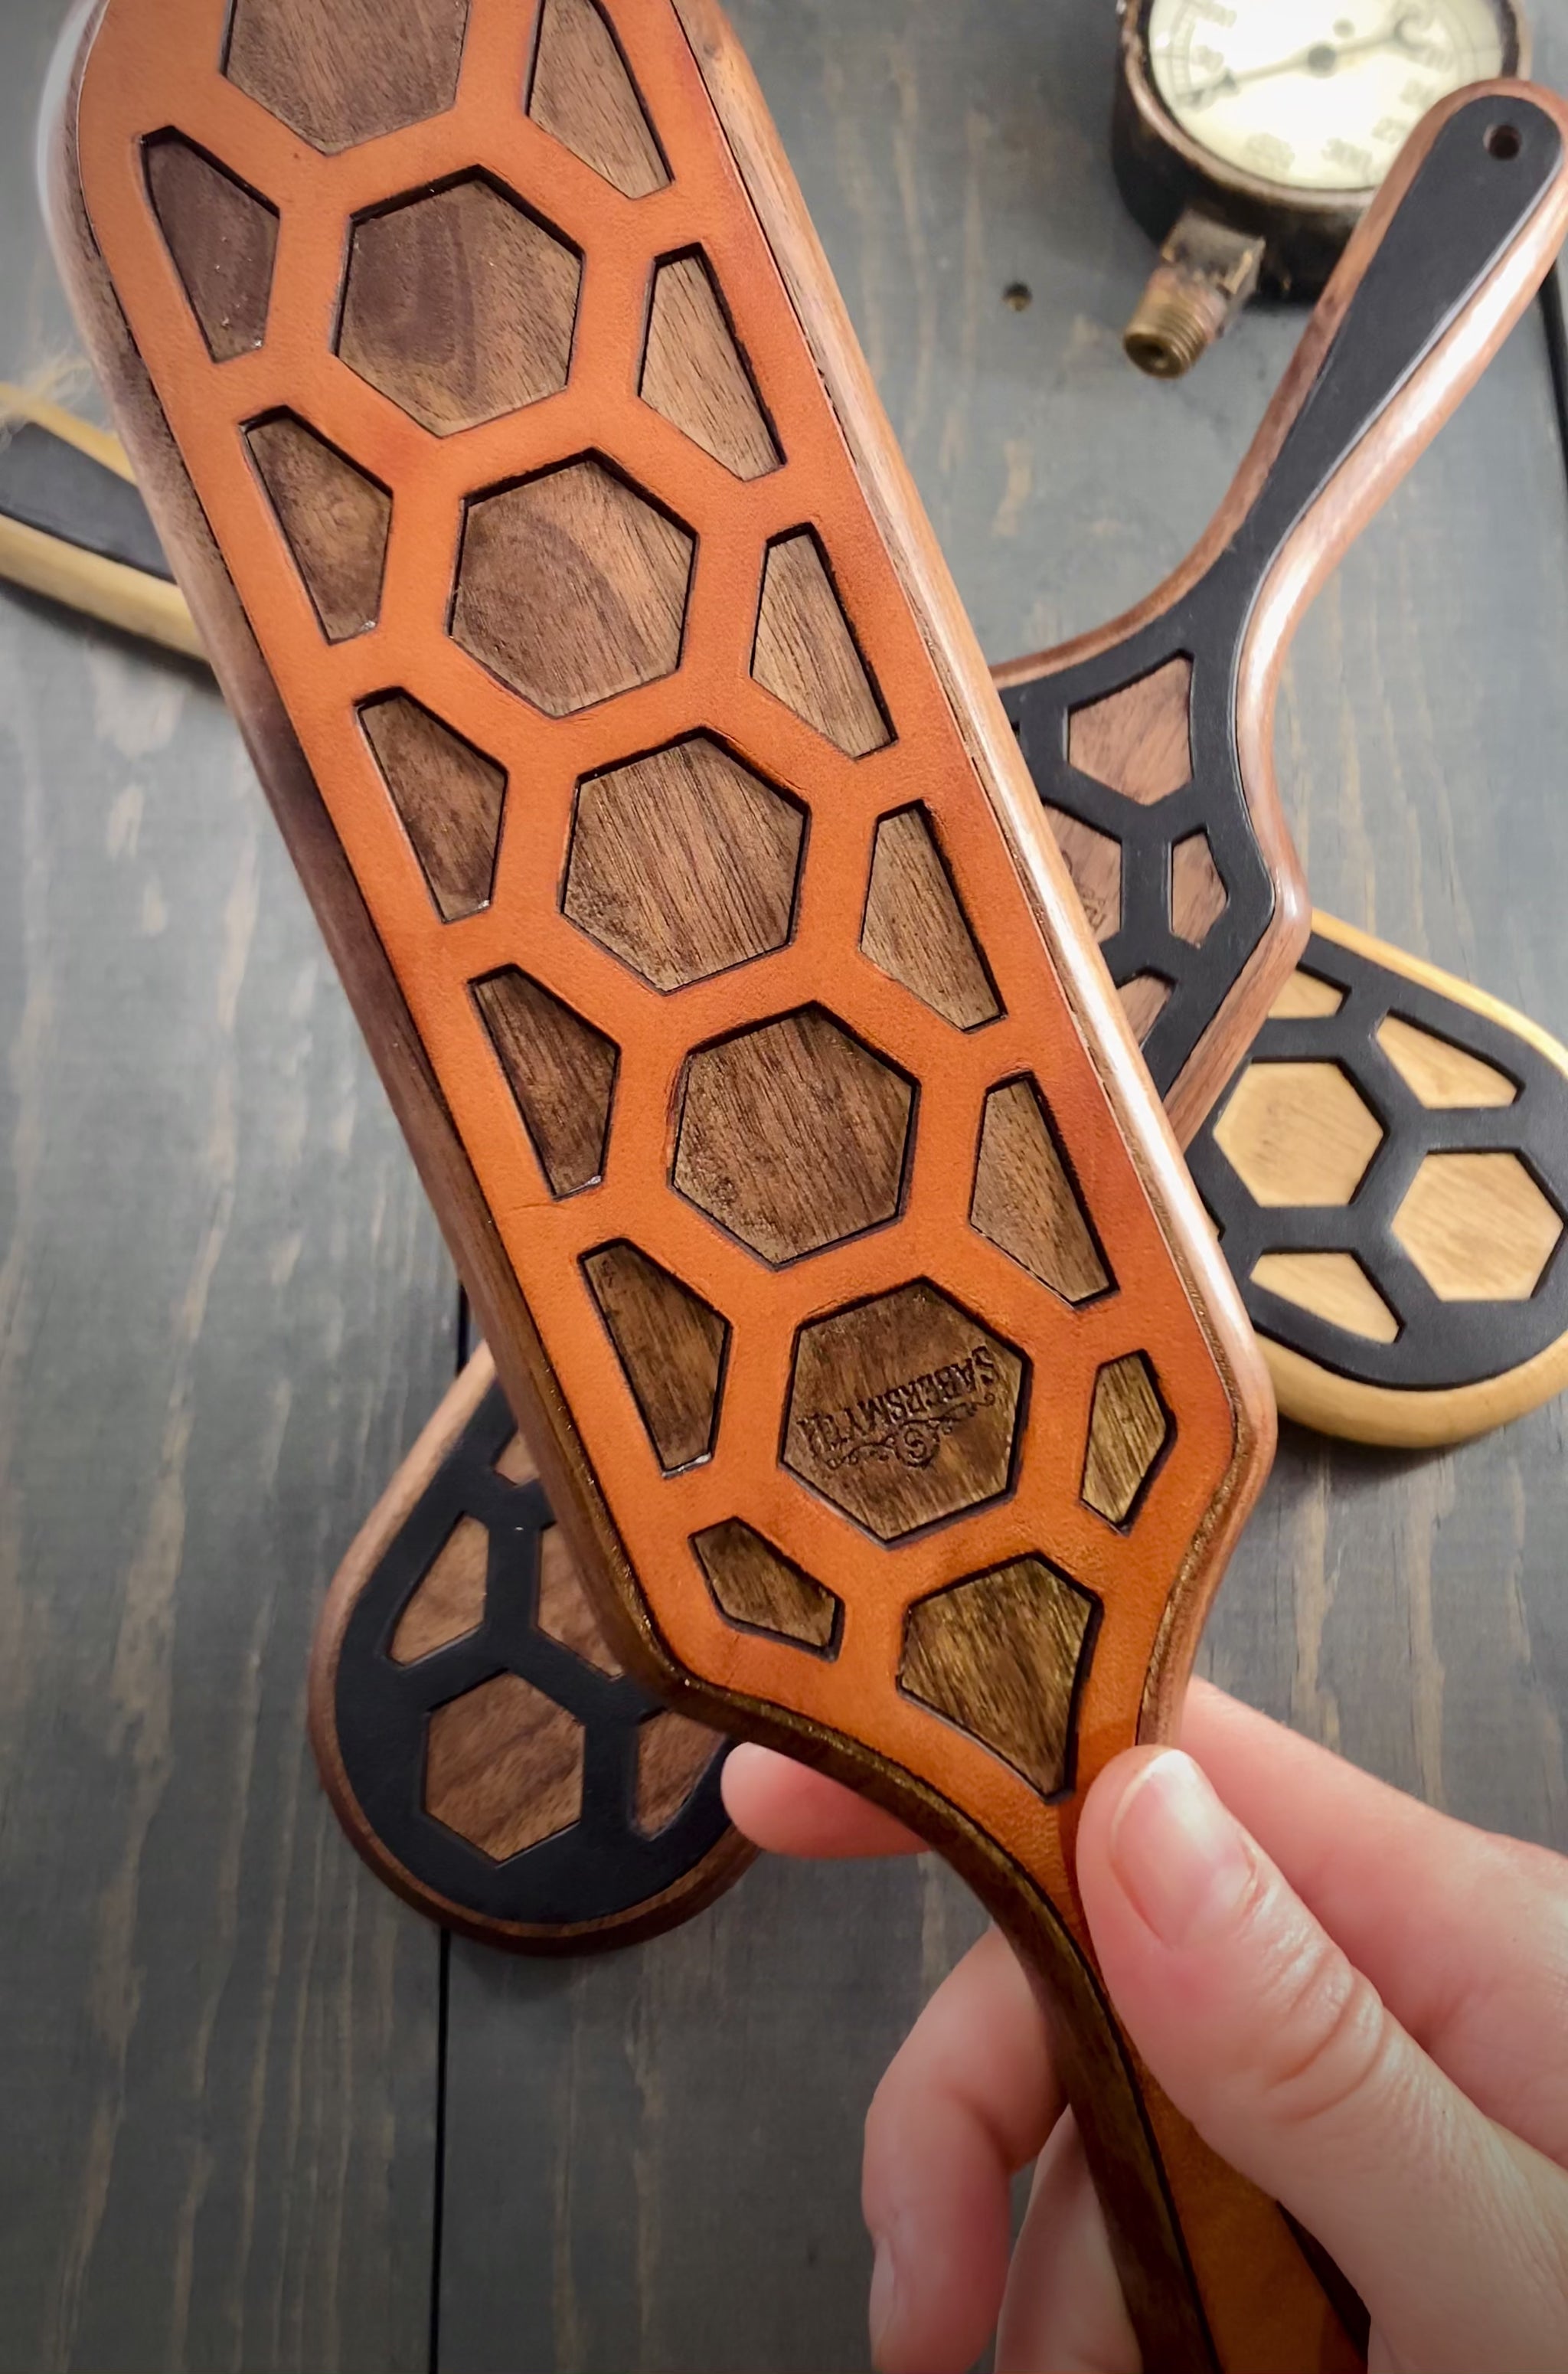 A short video showing the front and back of the oak spanking paddle with leather inlay.